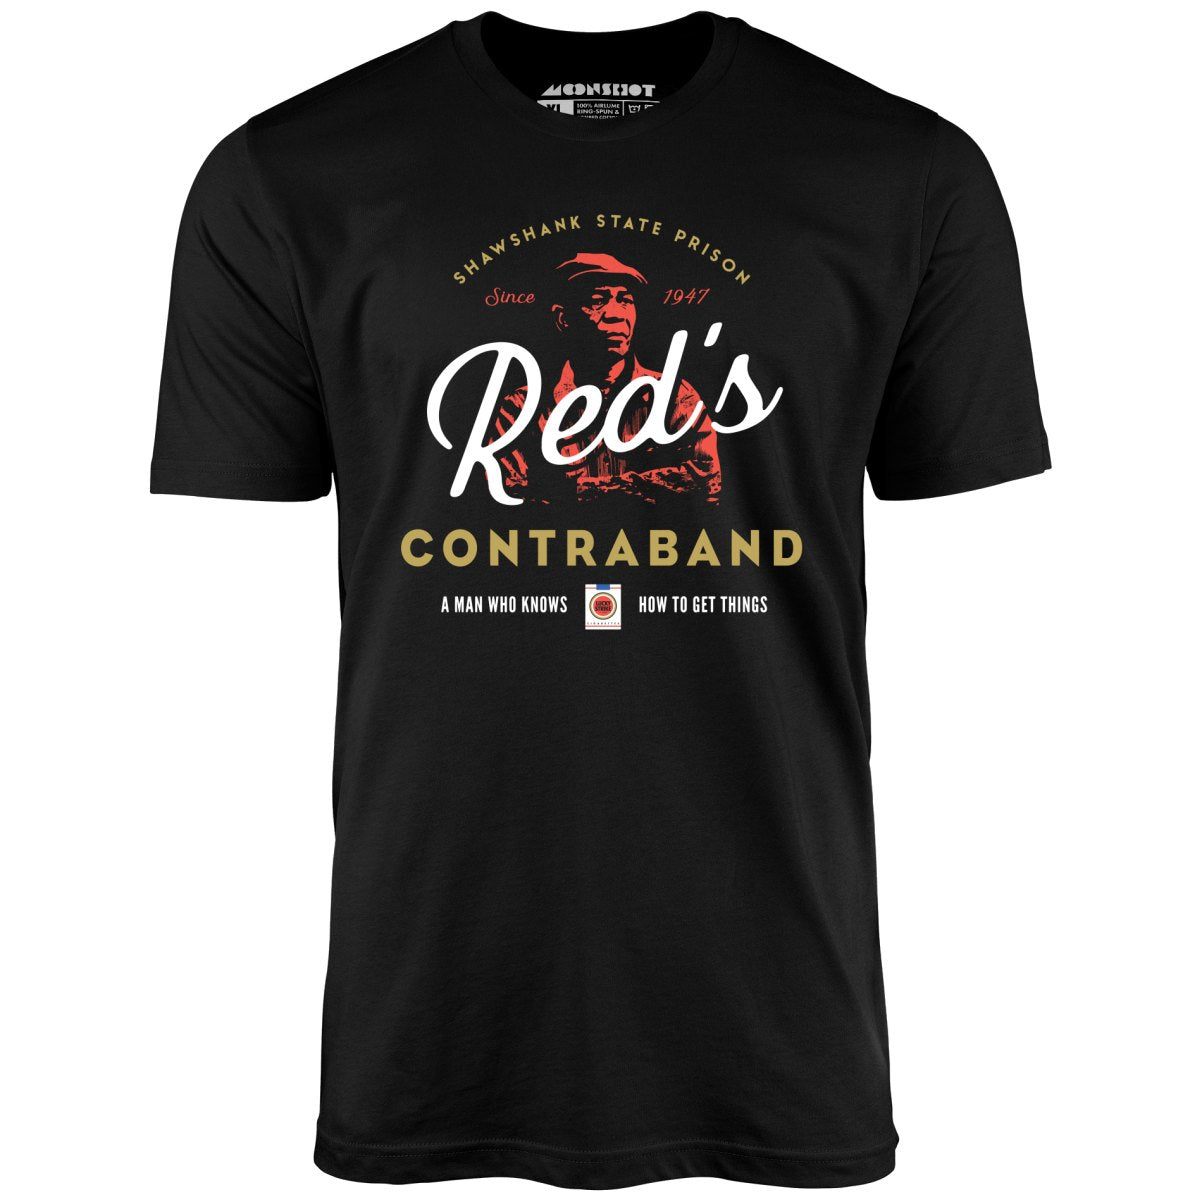 Red's Contraband - Unisex T-Shirt